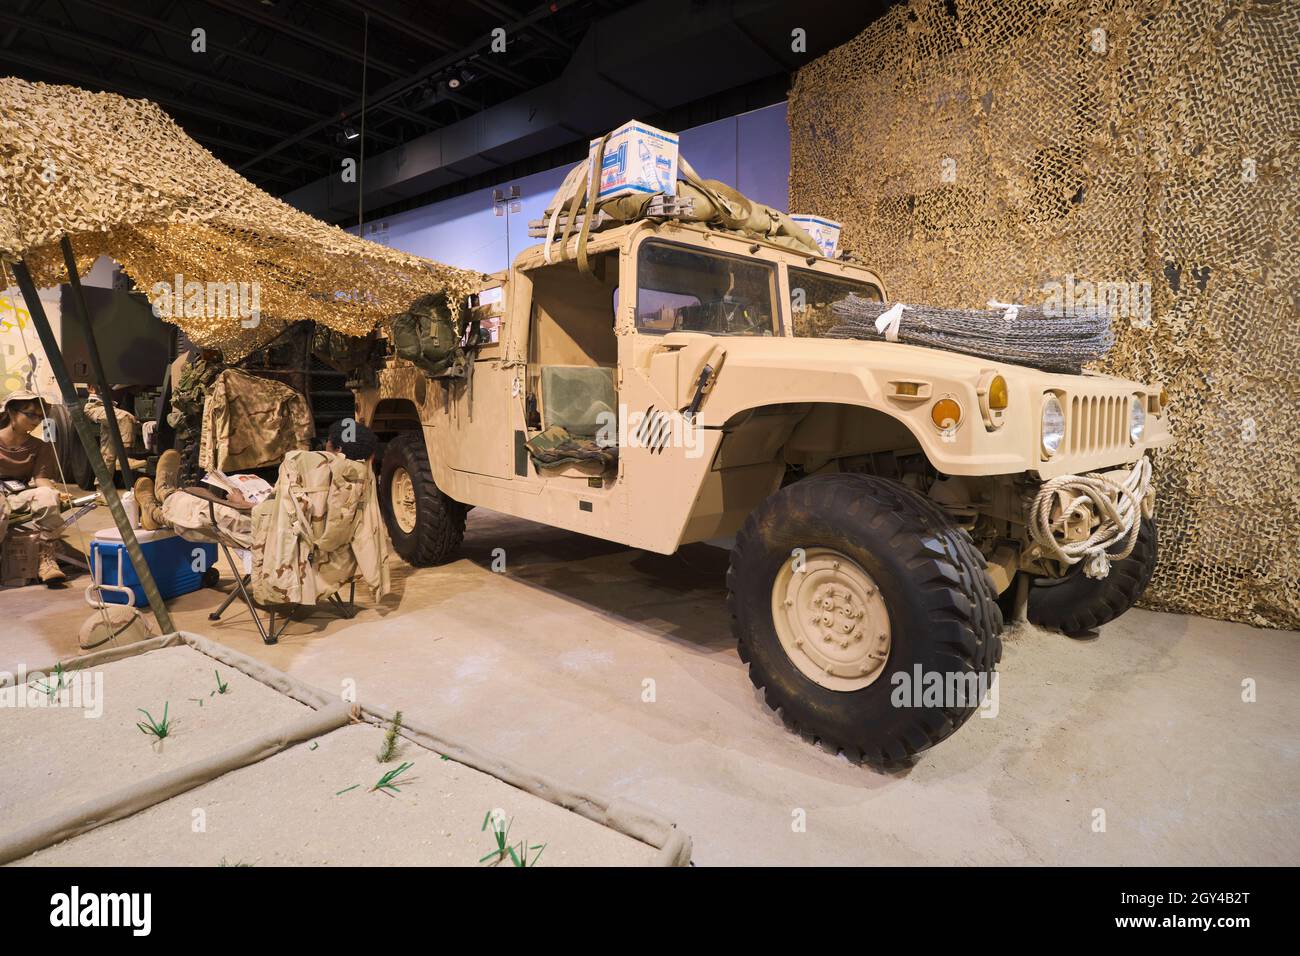 An HMMWV, Humvee vehicle, part of an encampment during Desert Storm. At the US Army Transportation Museum at Fort Eustis, Virginia. Stock Photo